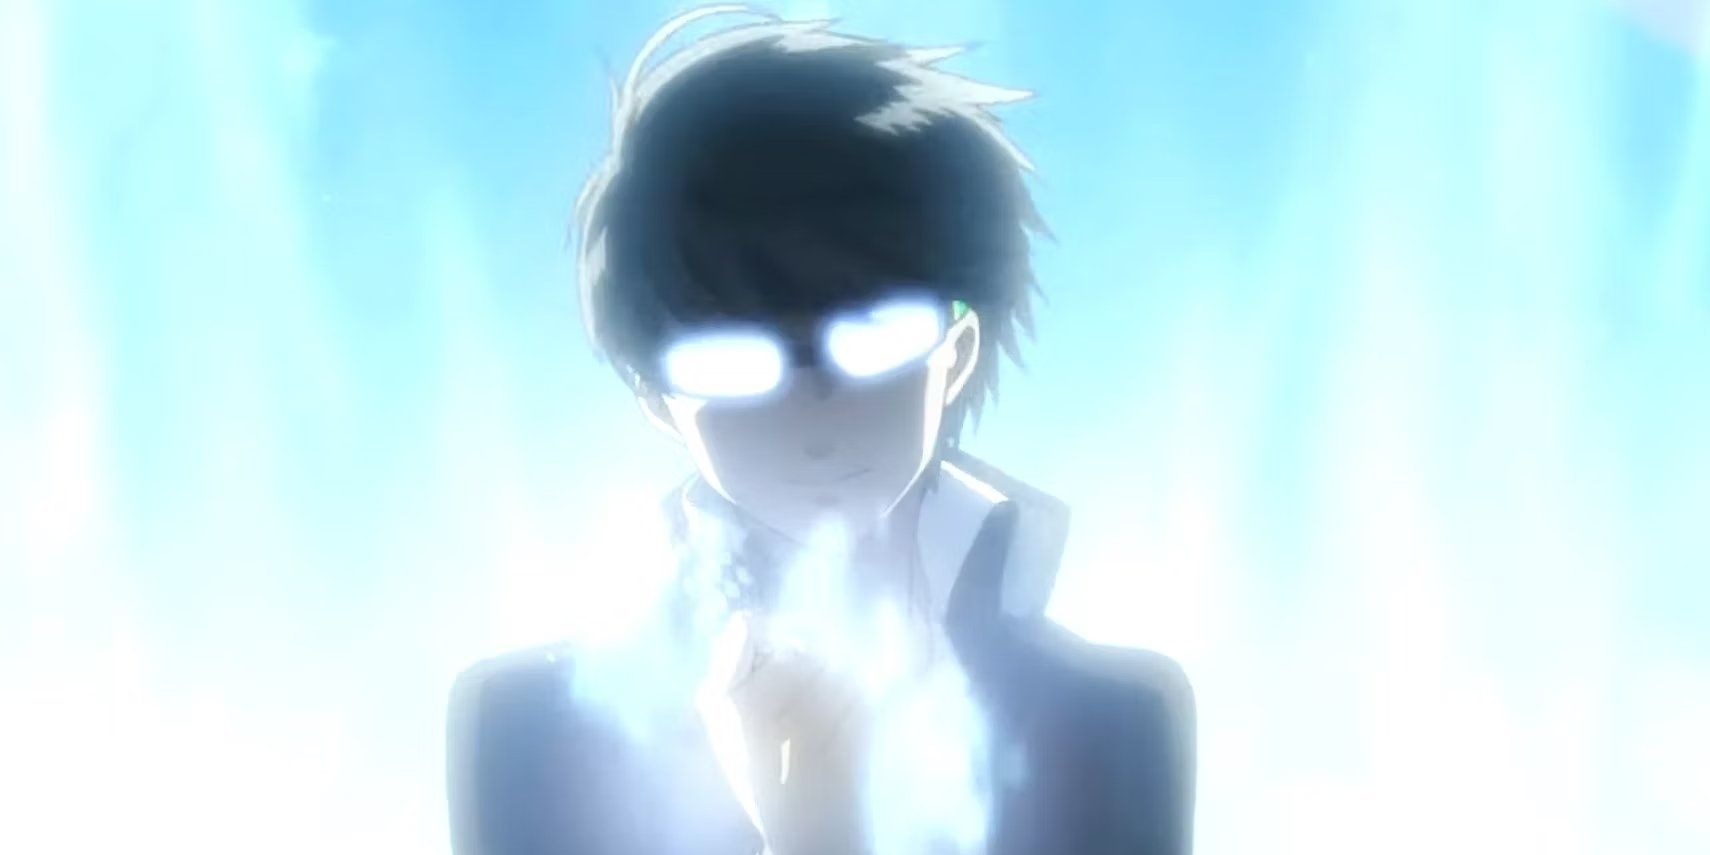 Yu Narukami from the Persona 4 Golden game, he is surrounded by light